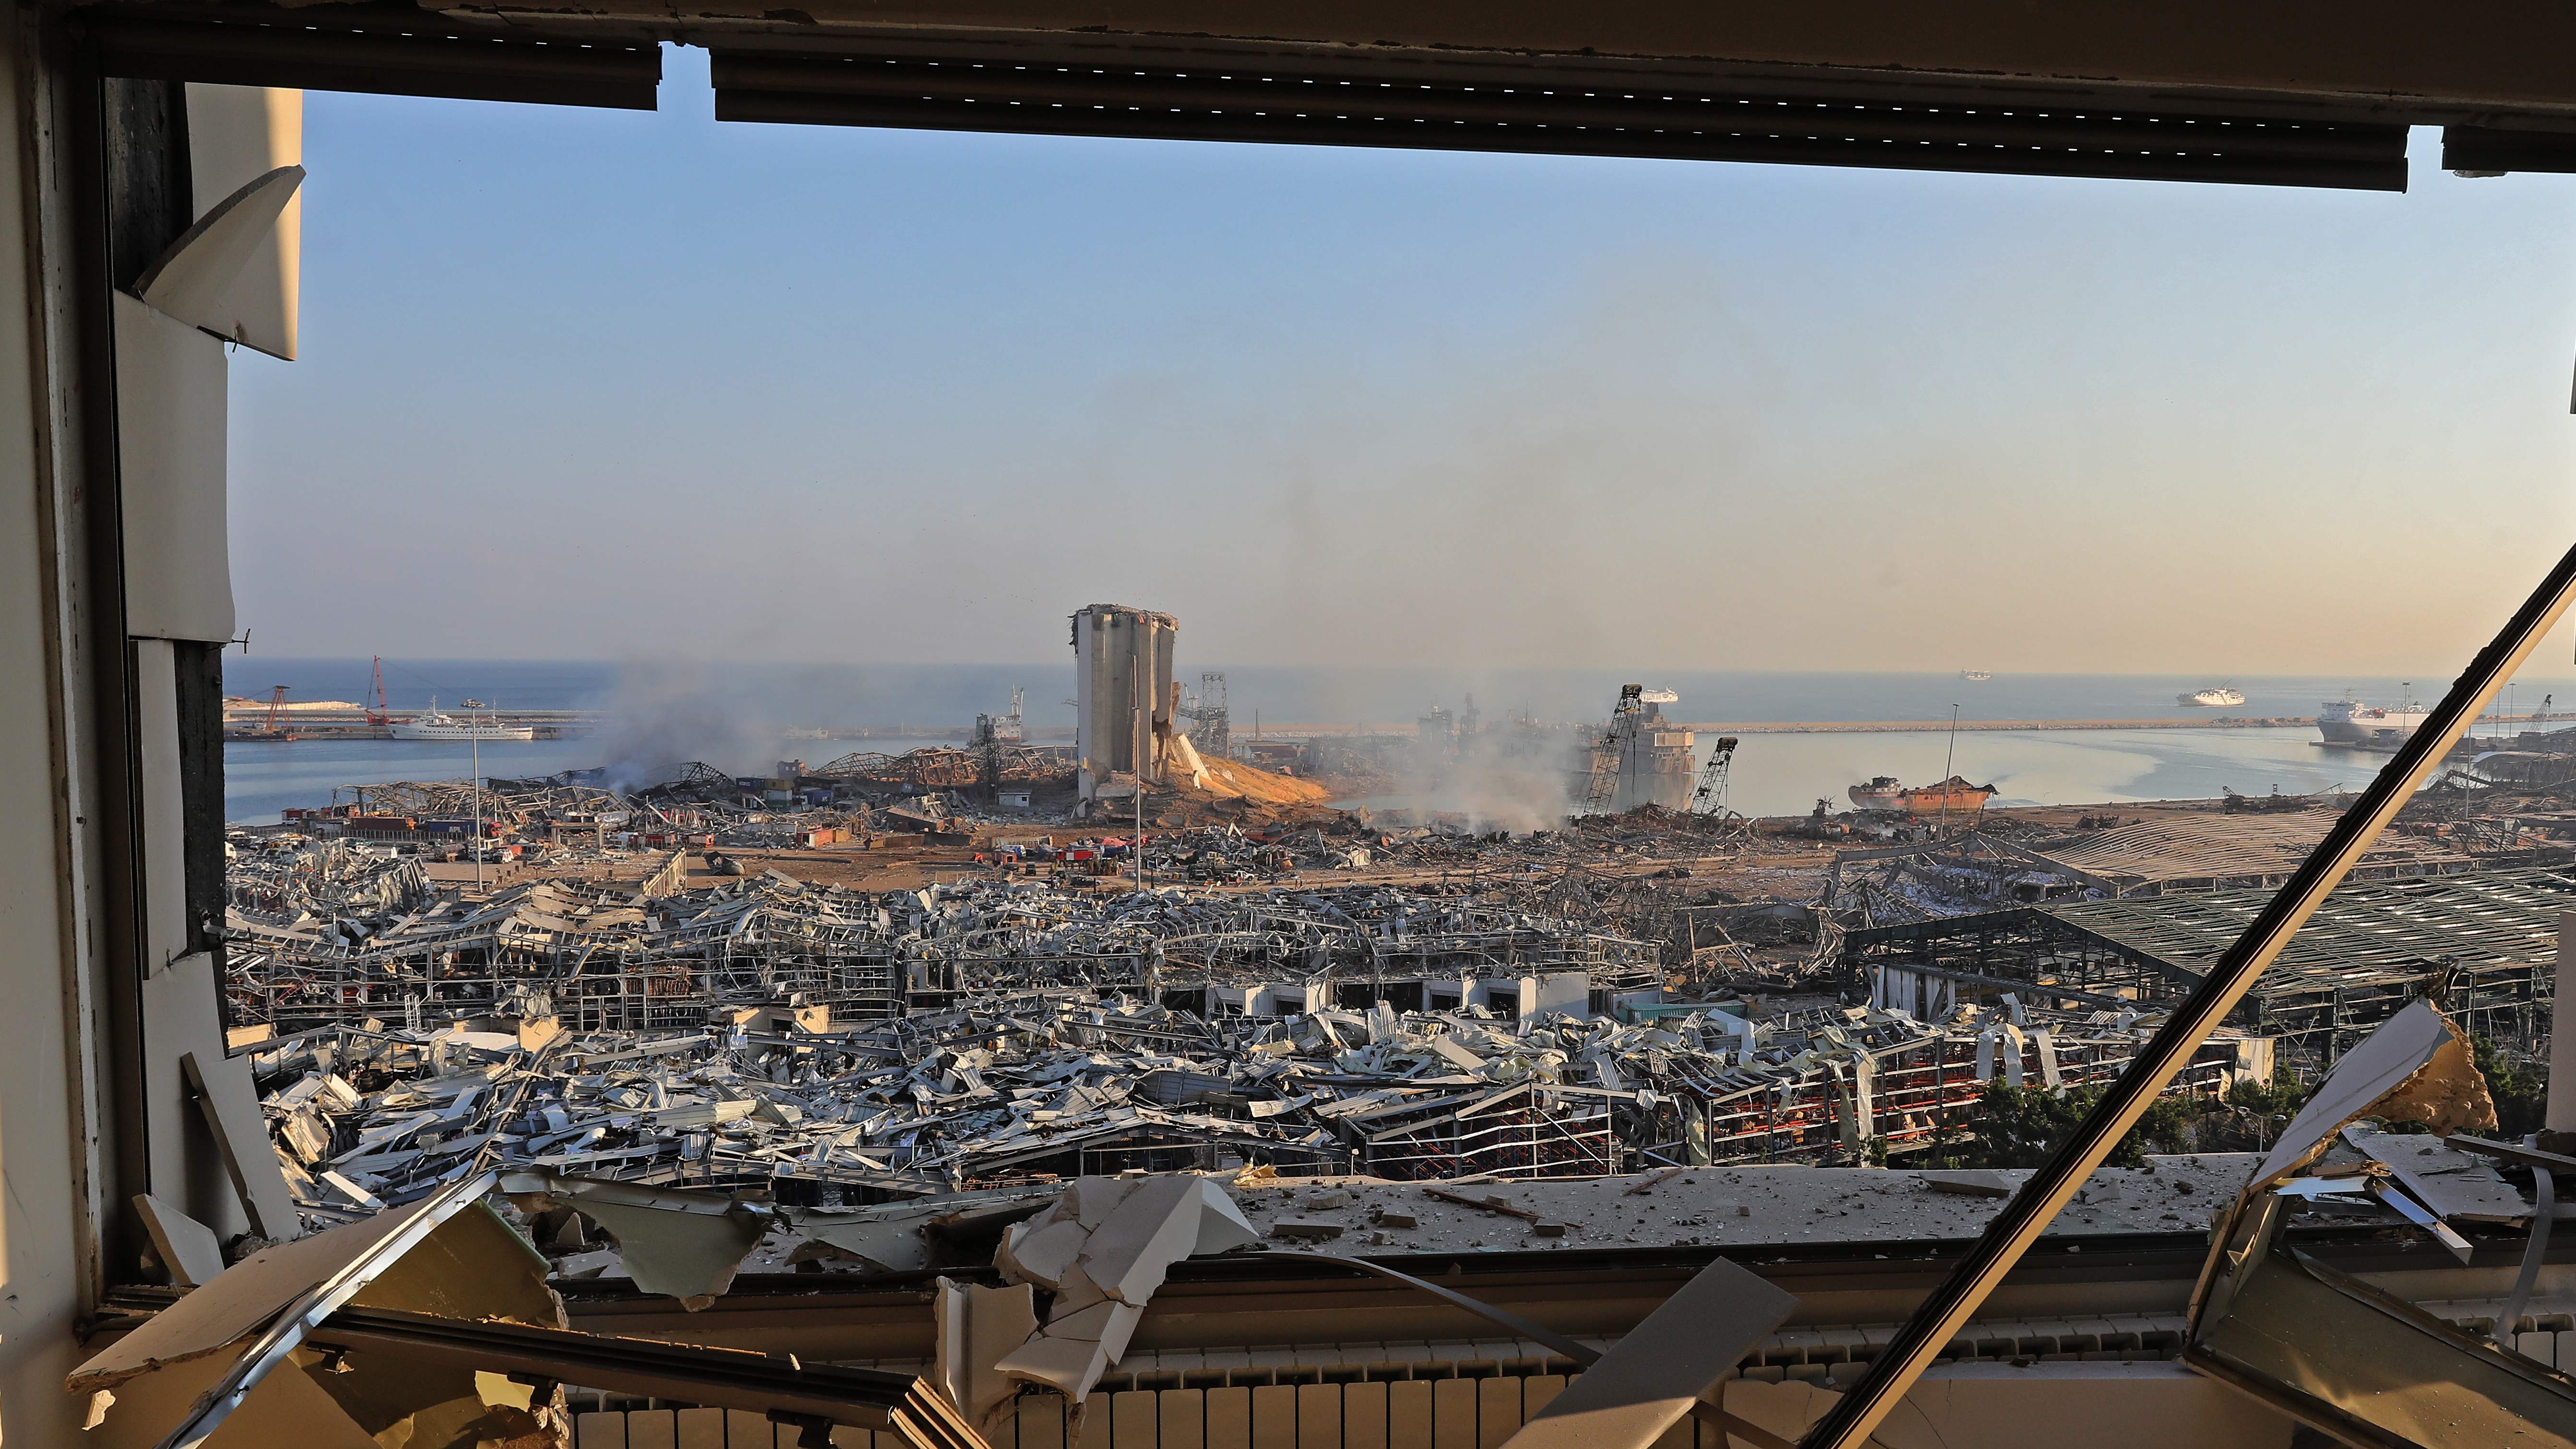 The aftermath of the Beirut port explosion in August 2020